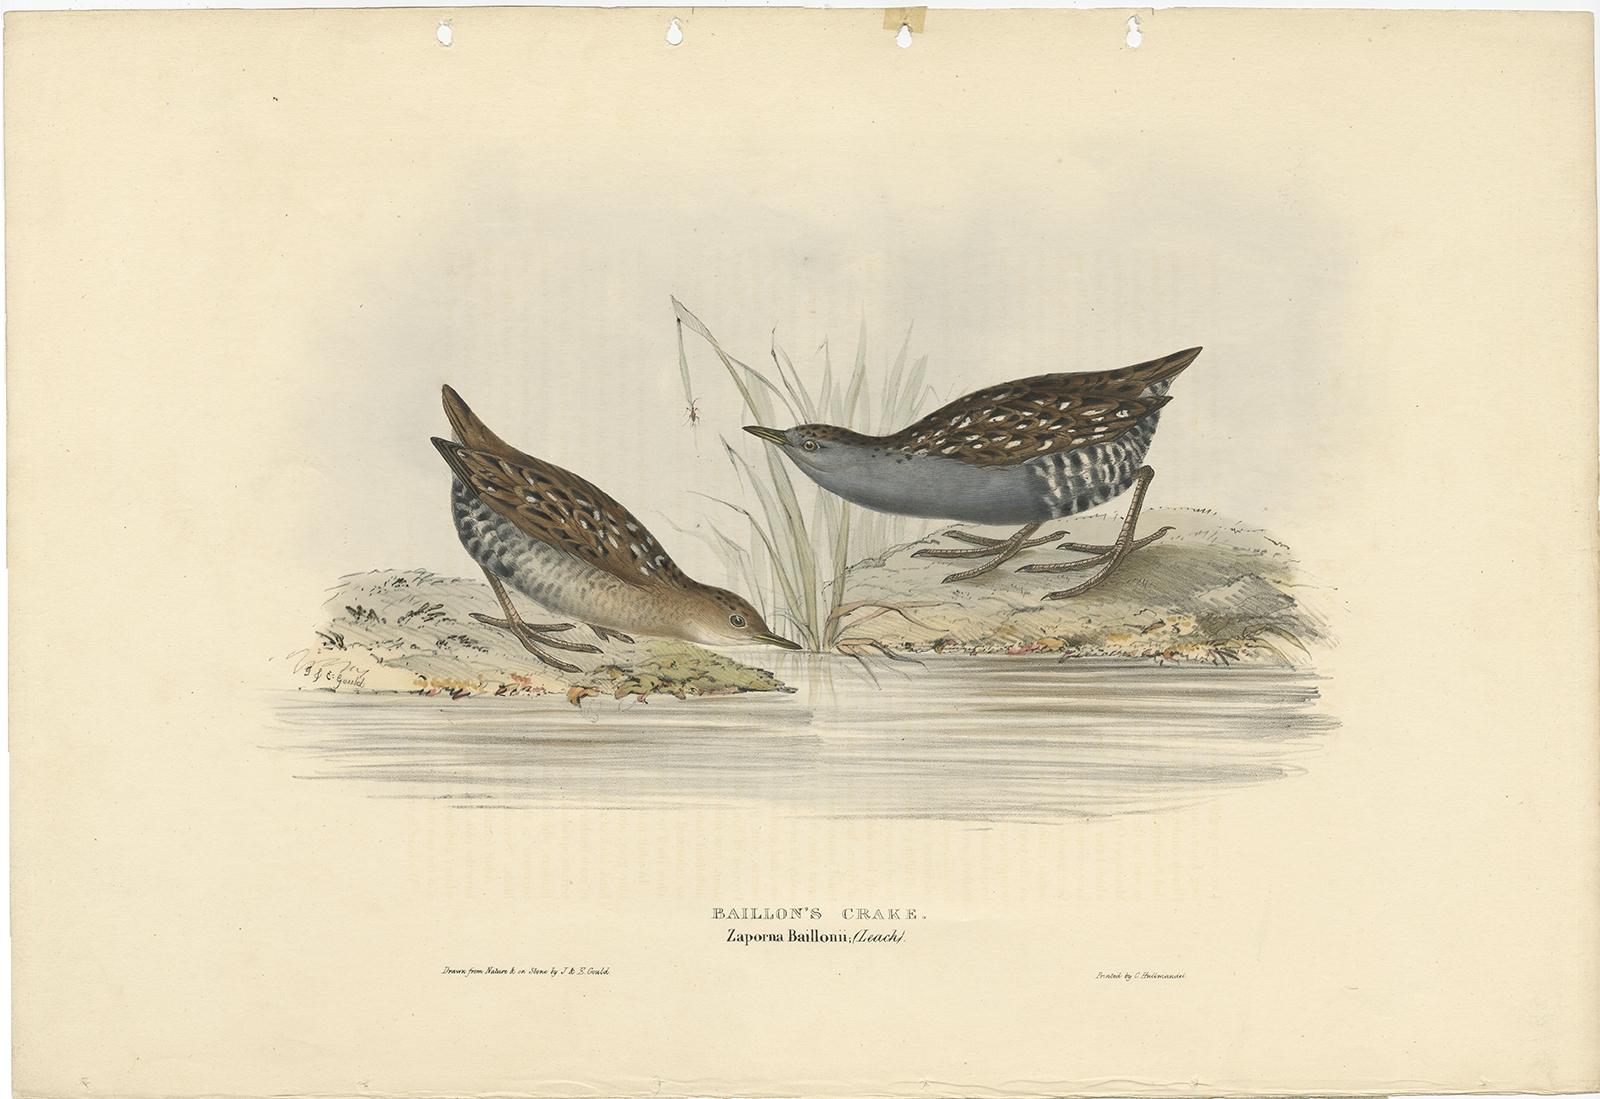 Antique bird print titled 'Baillon's Crake'. 

Old bird print depicting the Baillon's Crake. This print originates from 'Birds of Europe' by J. Gould (1832-1837).

Artists and Engravers: John Gould (1804 - 1881) was an English ornithologist and